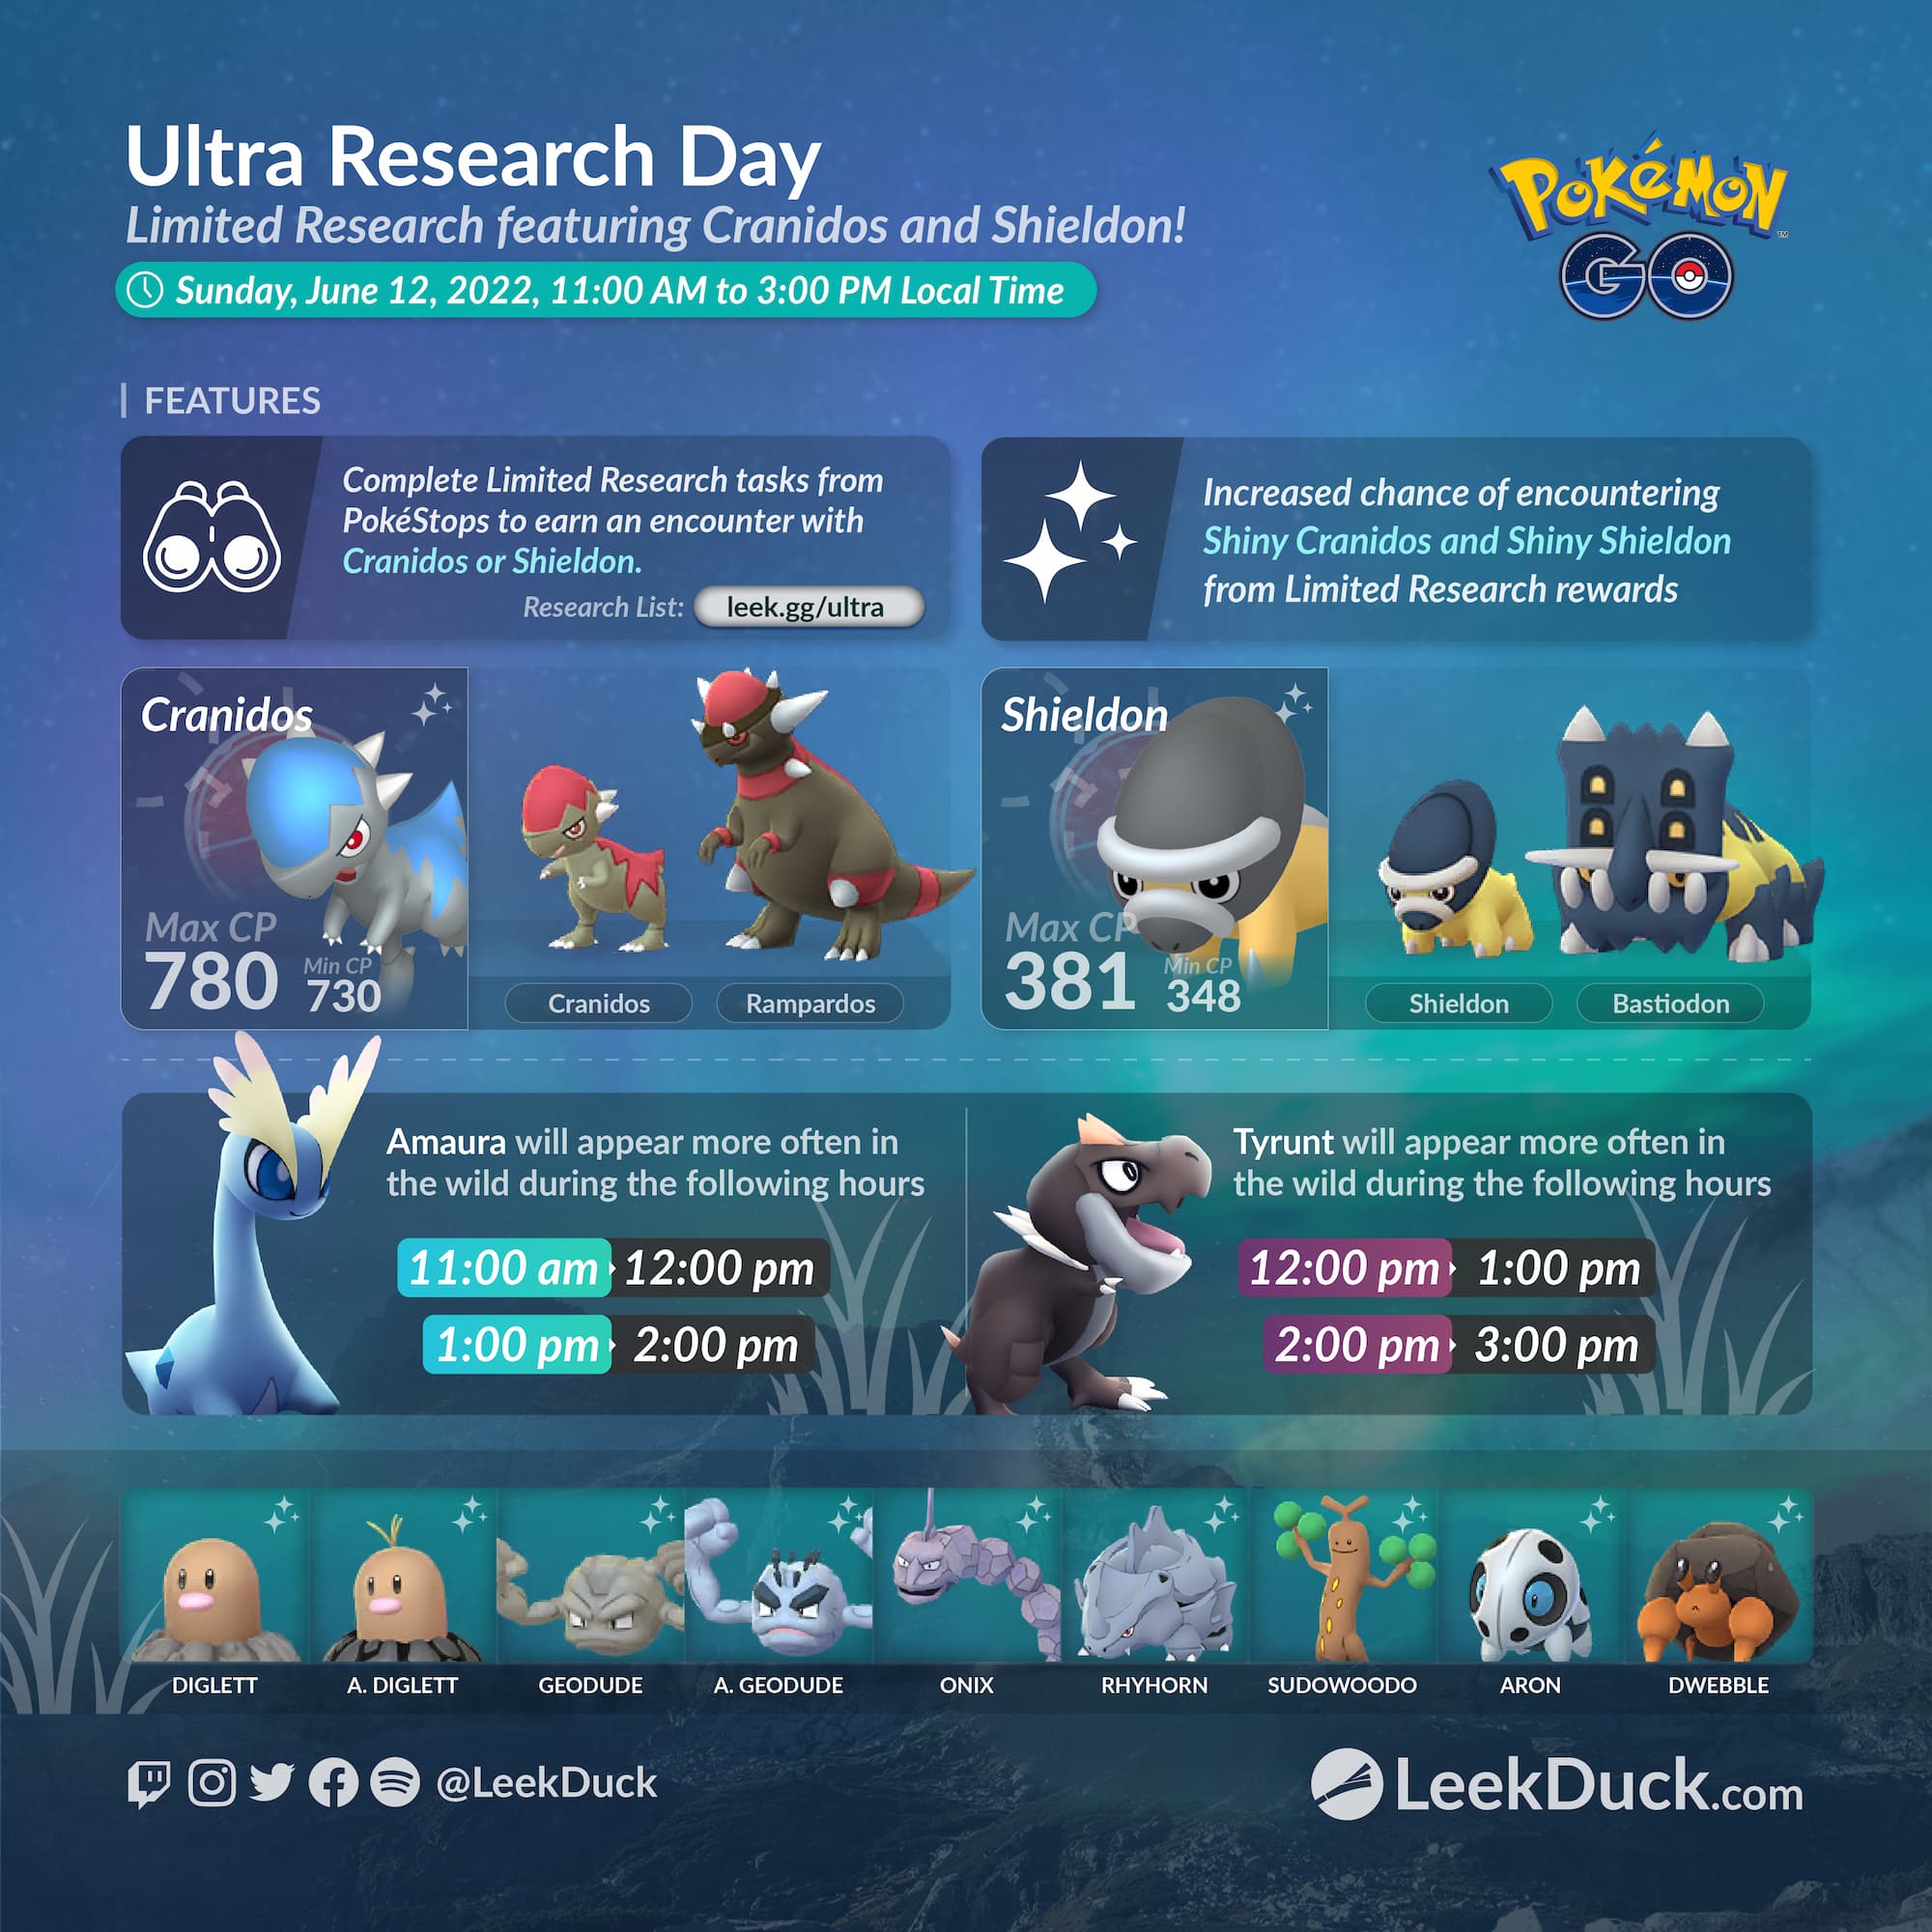 Ultra Beast Arrival - Event-exclusive Timed Research (LeekDuck) :  r/TheSilphRoad